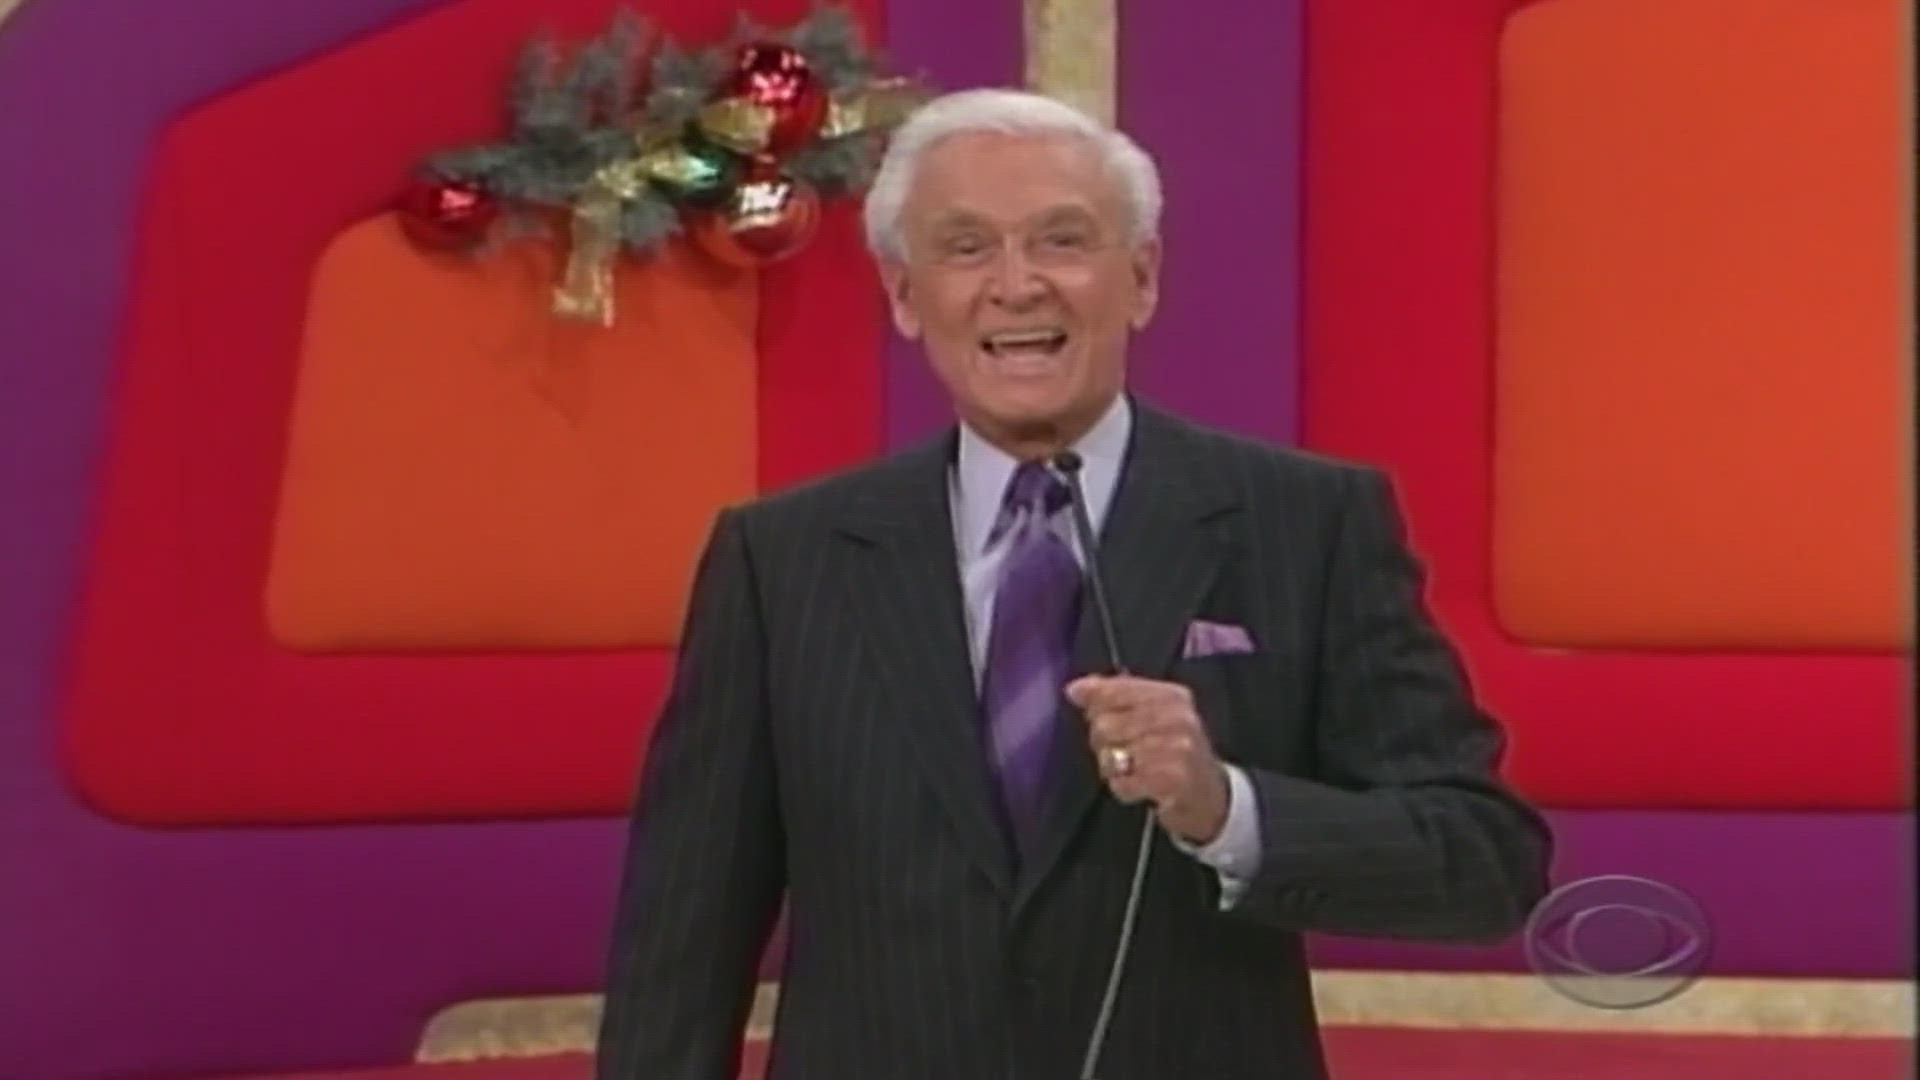 Bob Barker spent 35 years giving away fabulous prizes, advocating for animals and had an award-winning fight scene with Adam Sandler on the big screen.